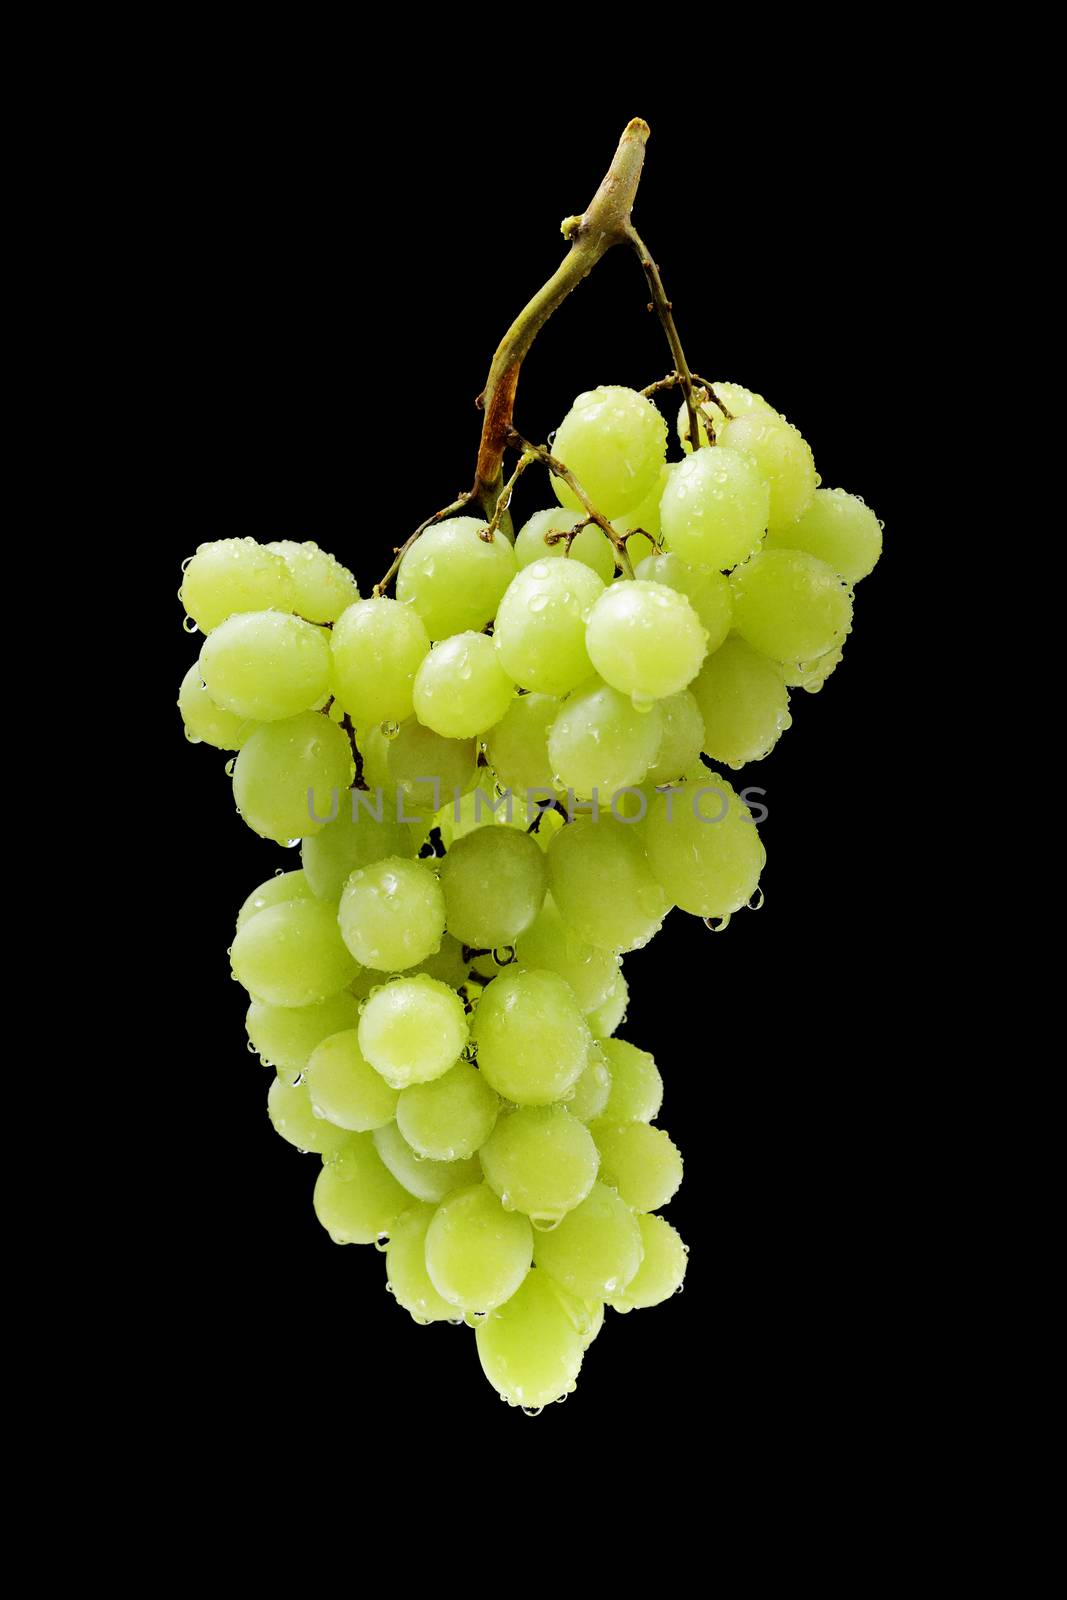 A Cluster of wet green table grapes on black background.